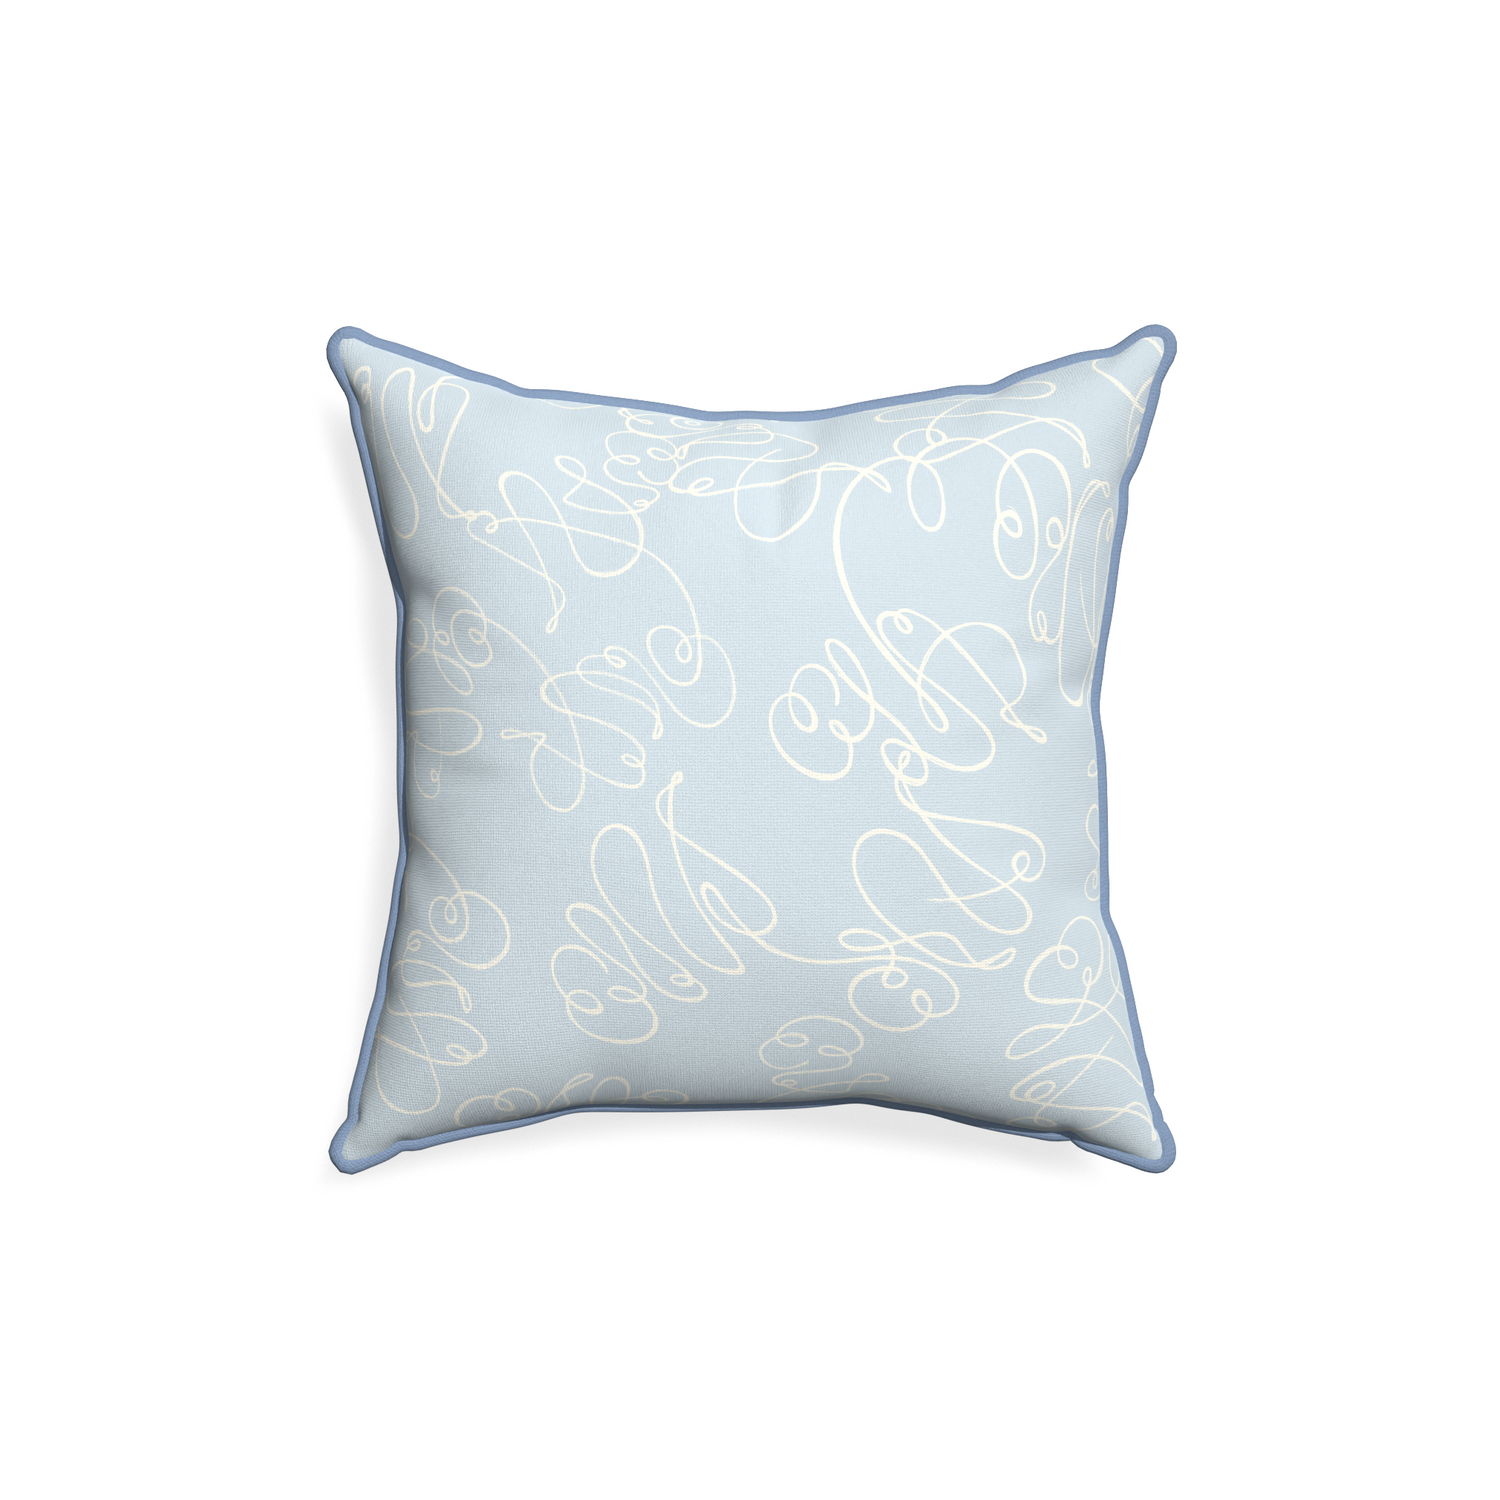 18-square mirabella custom powder blue abstractpillow with sky piping on white background